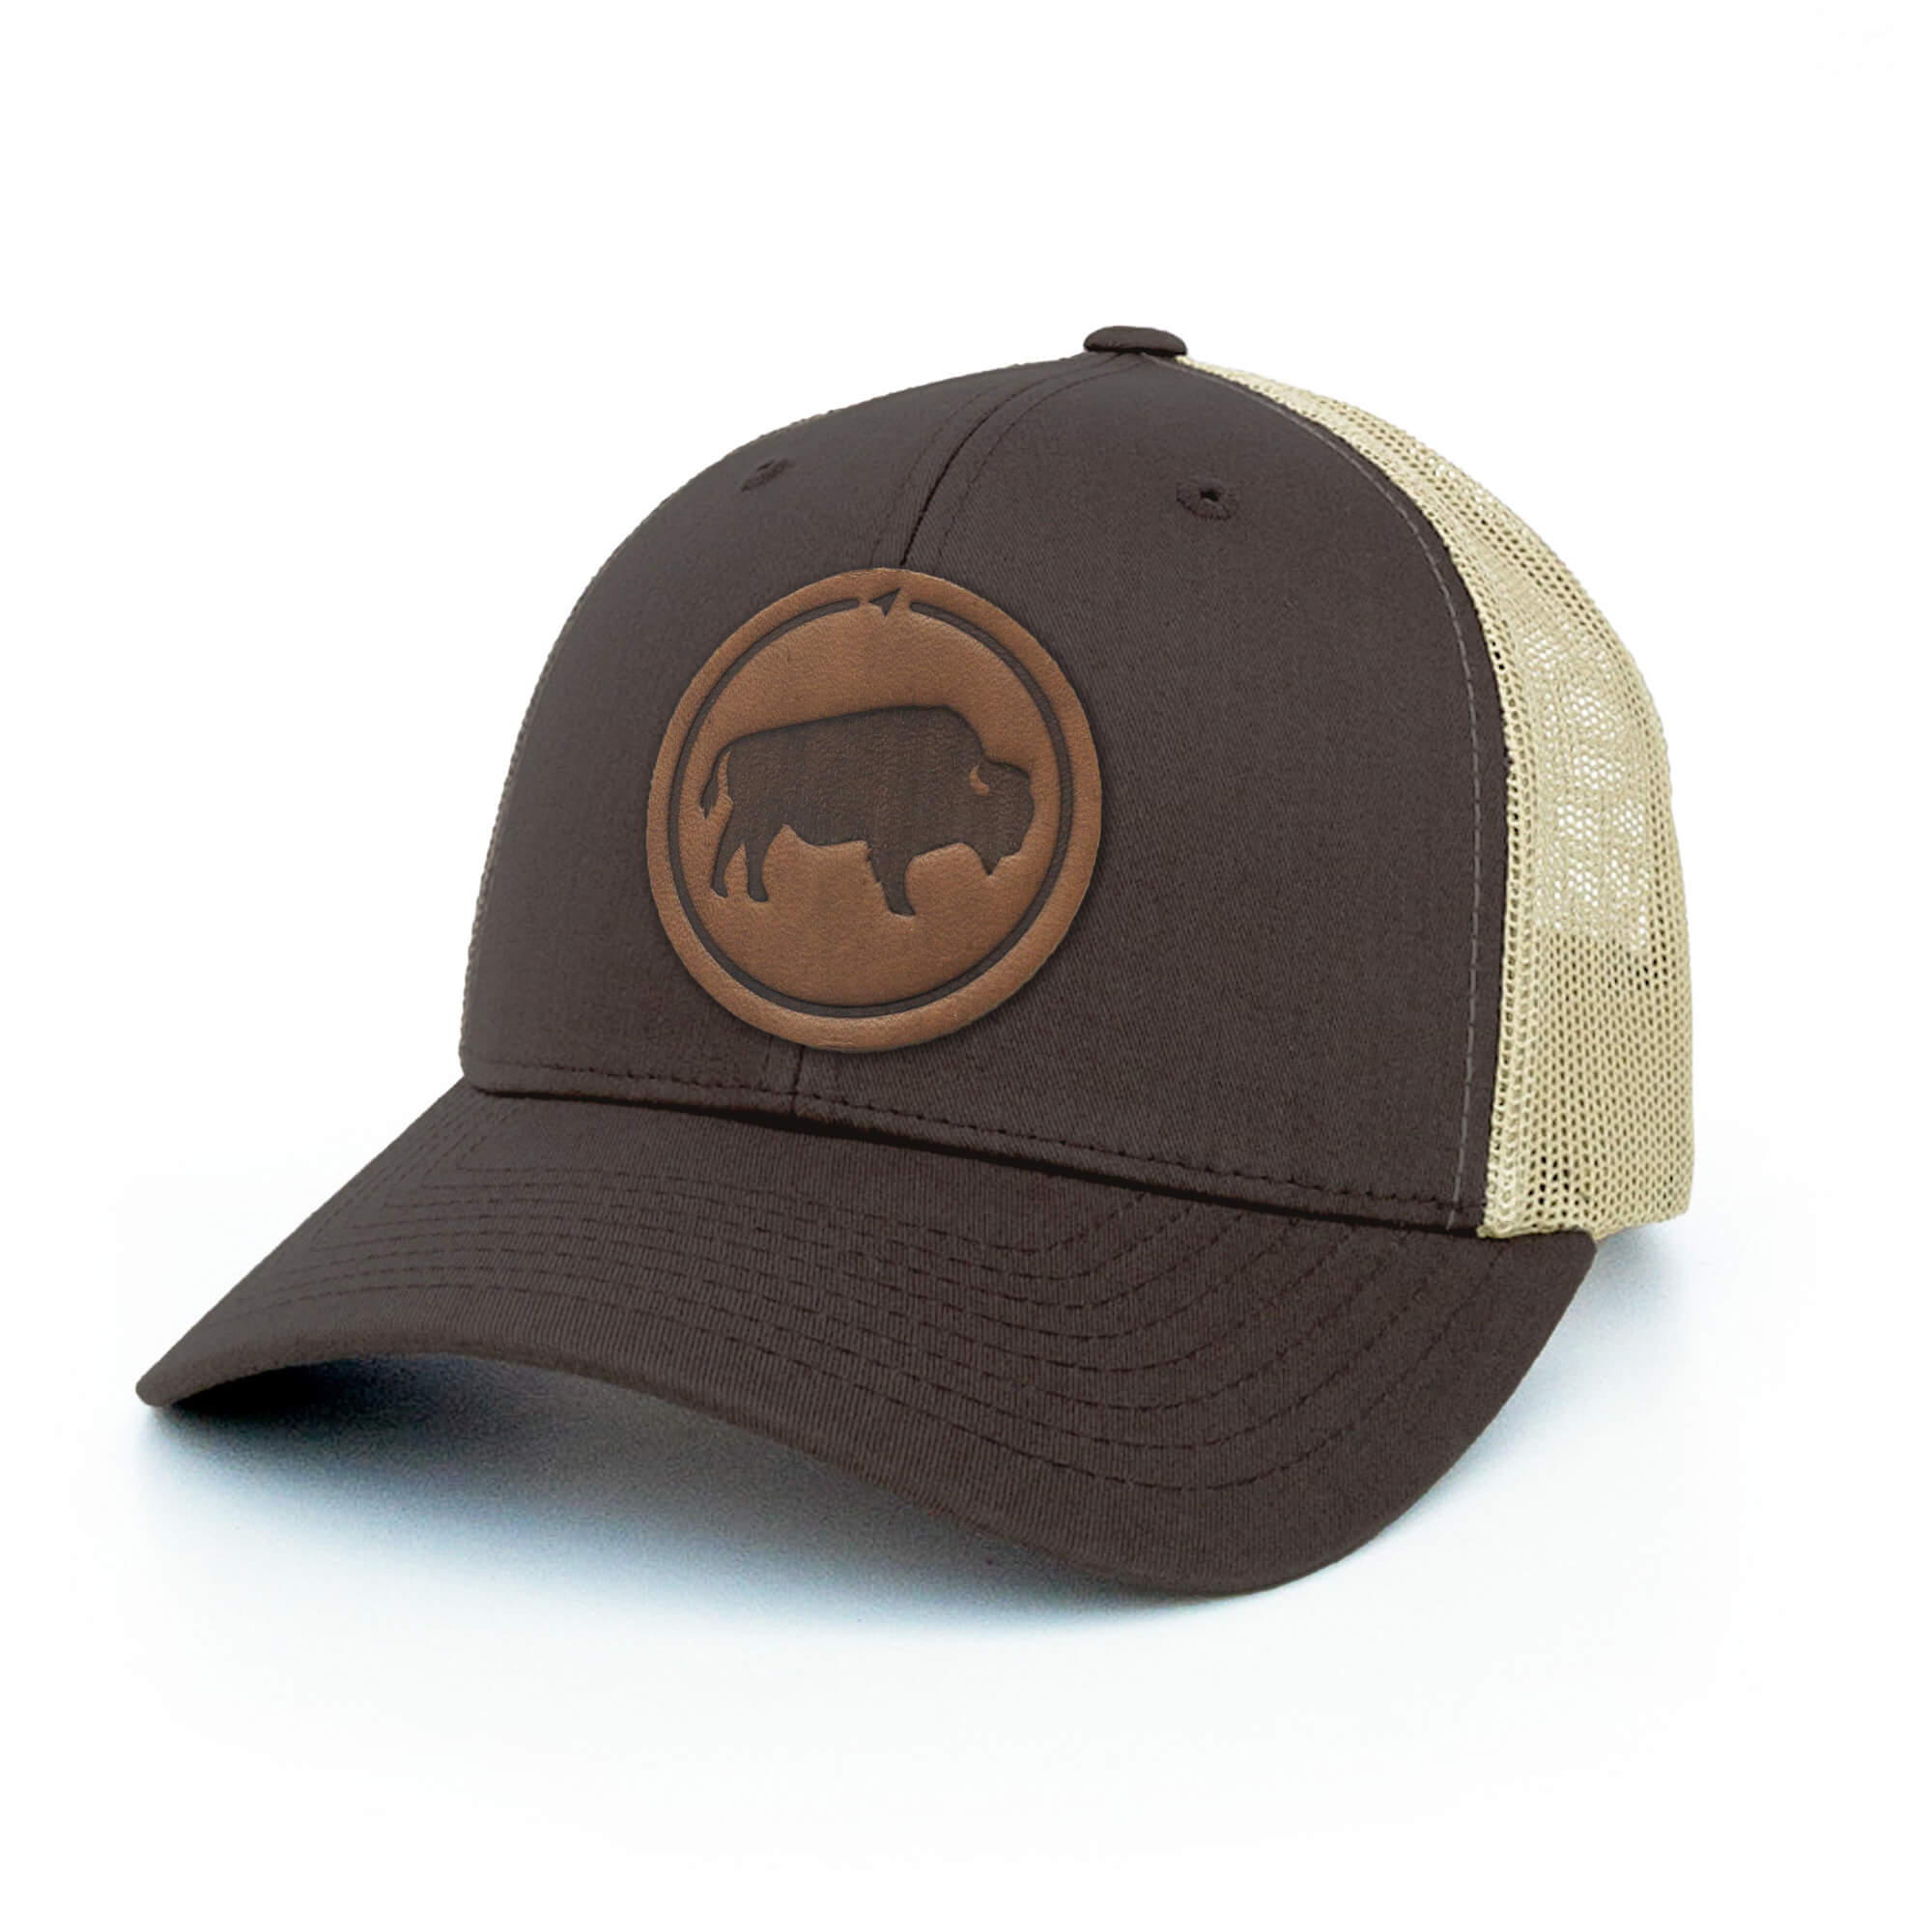 Brown and khaki trucker hat with full-grain leather patch of Bison | BLACK-004-010, CHARC-004-010, NAVY-004-010, HGREY-004-010, MOSS-004-010, BROWN-004-010  Edit alt text